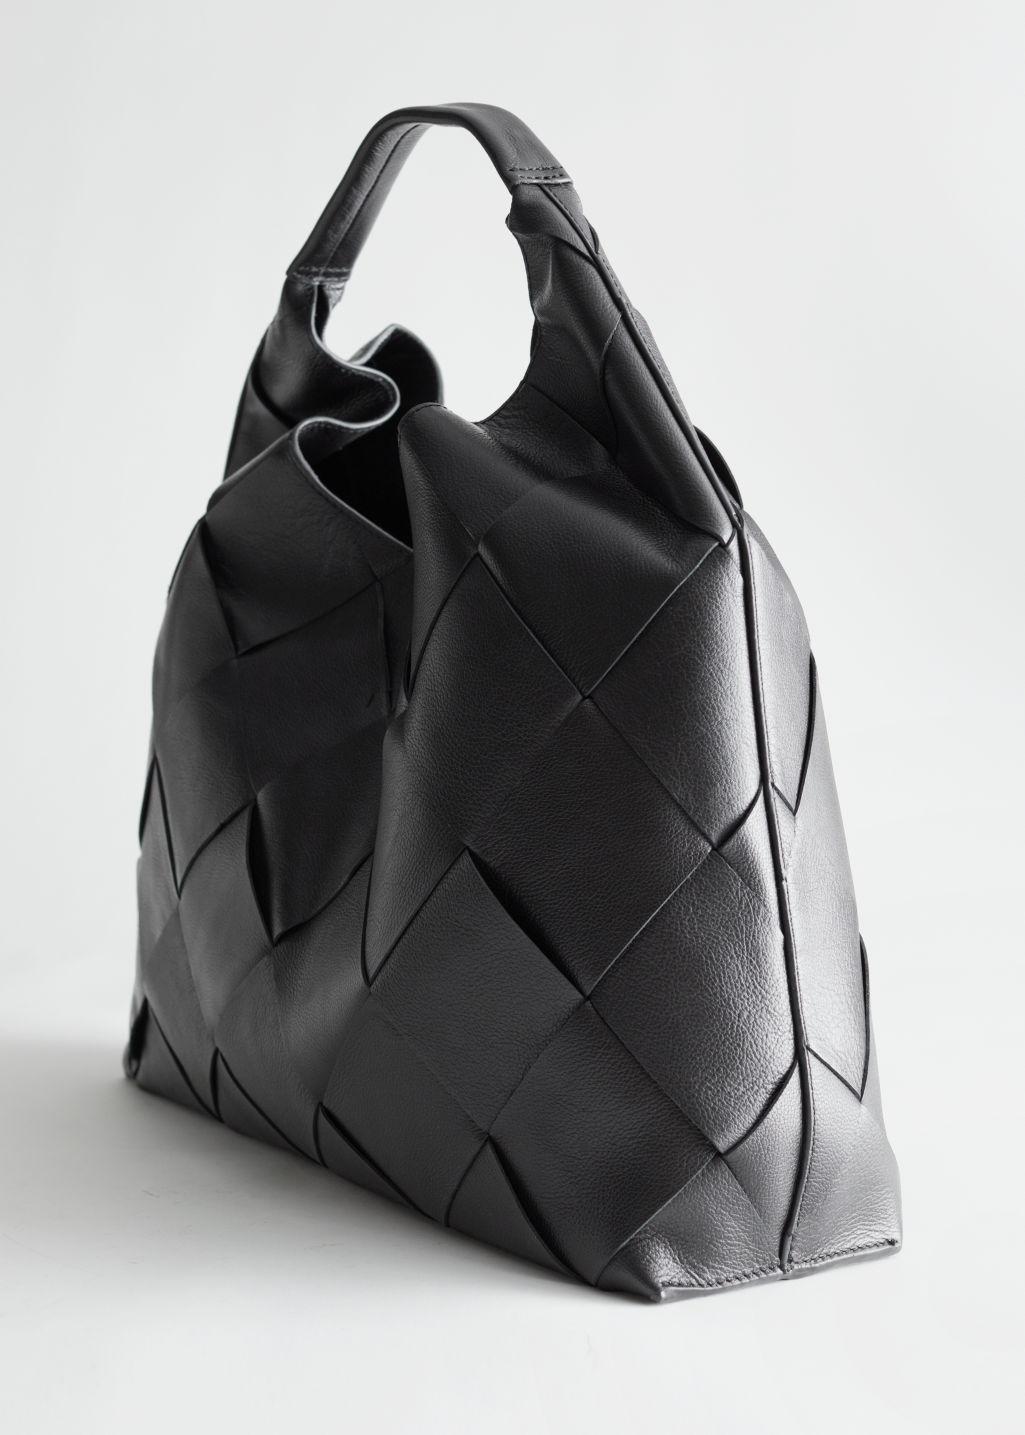 & Other Stories Braided Leather Tote Bag in Black | Lyst